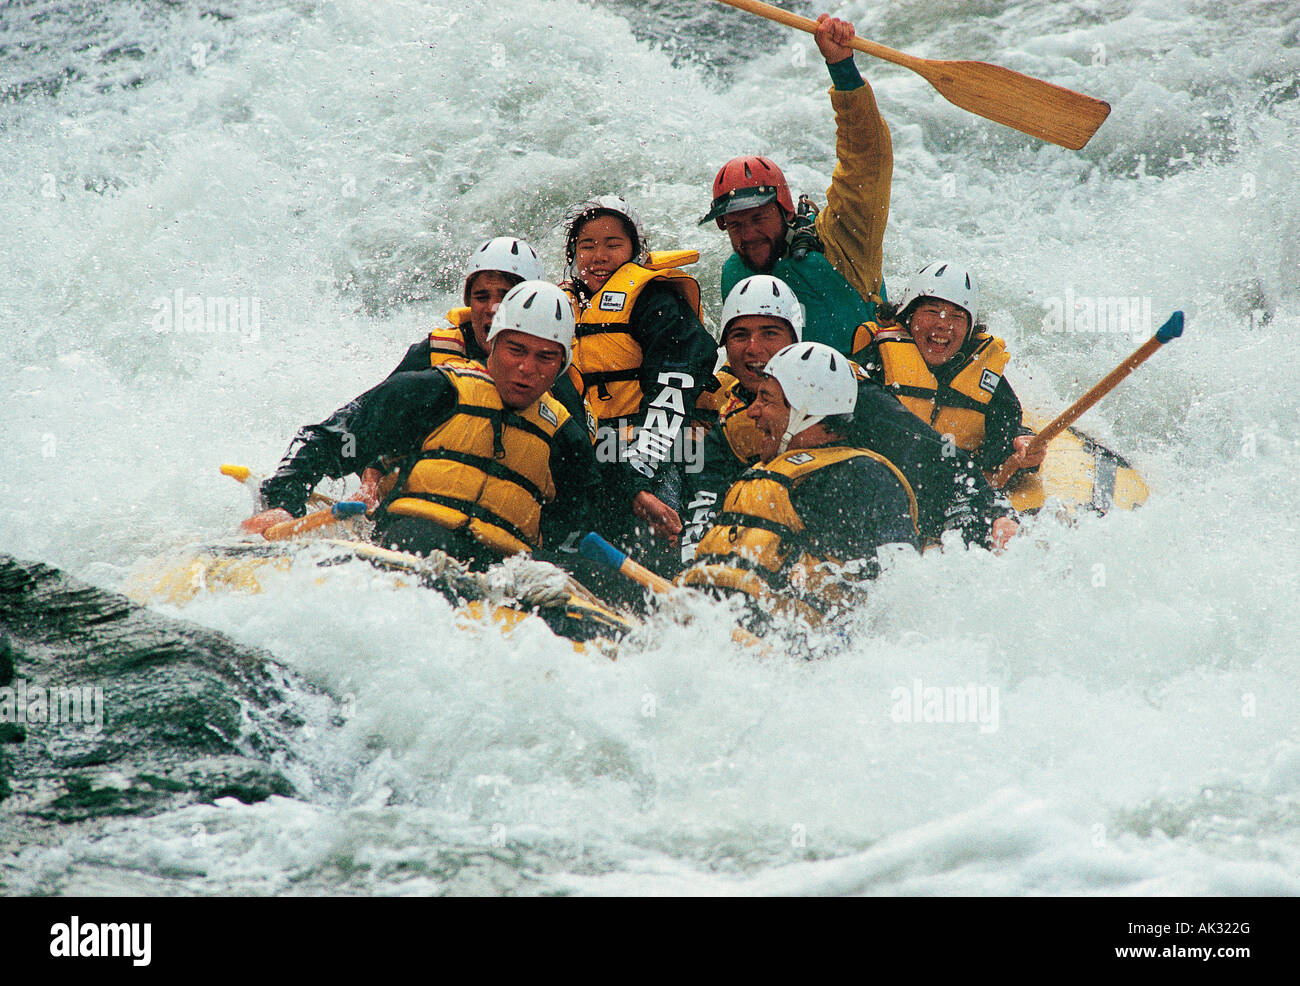 Group of people descending white water river rapids in rubber raft. Stock Photo